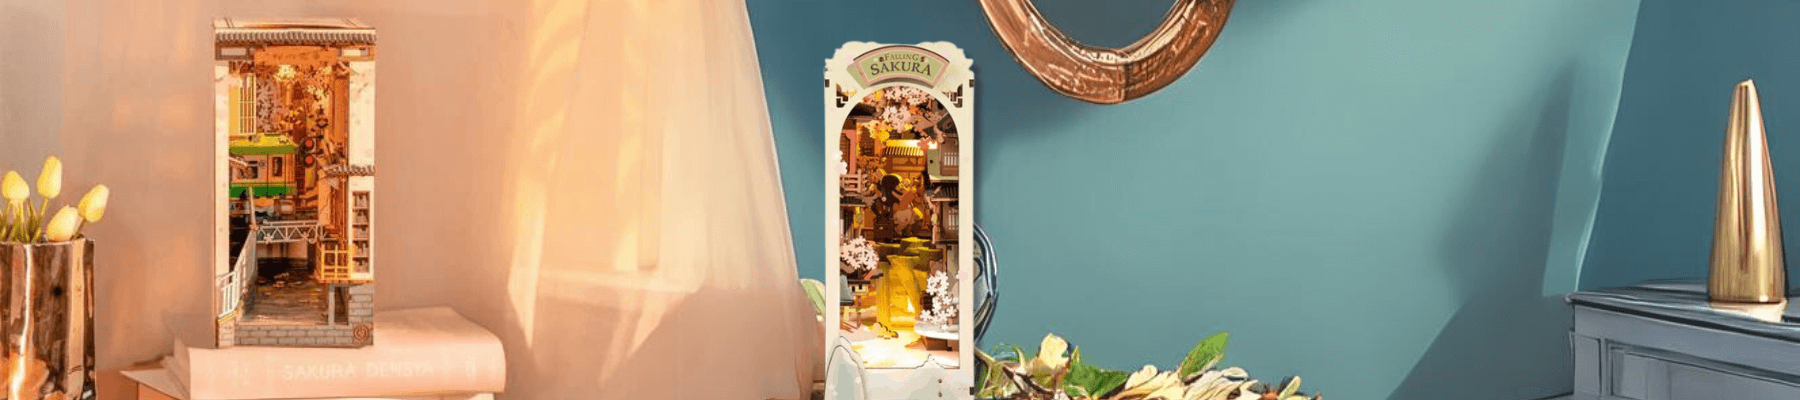 Book Nook / Diorama stories from Rolife